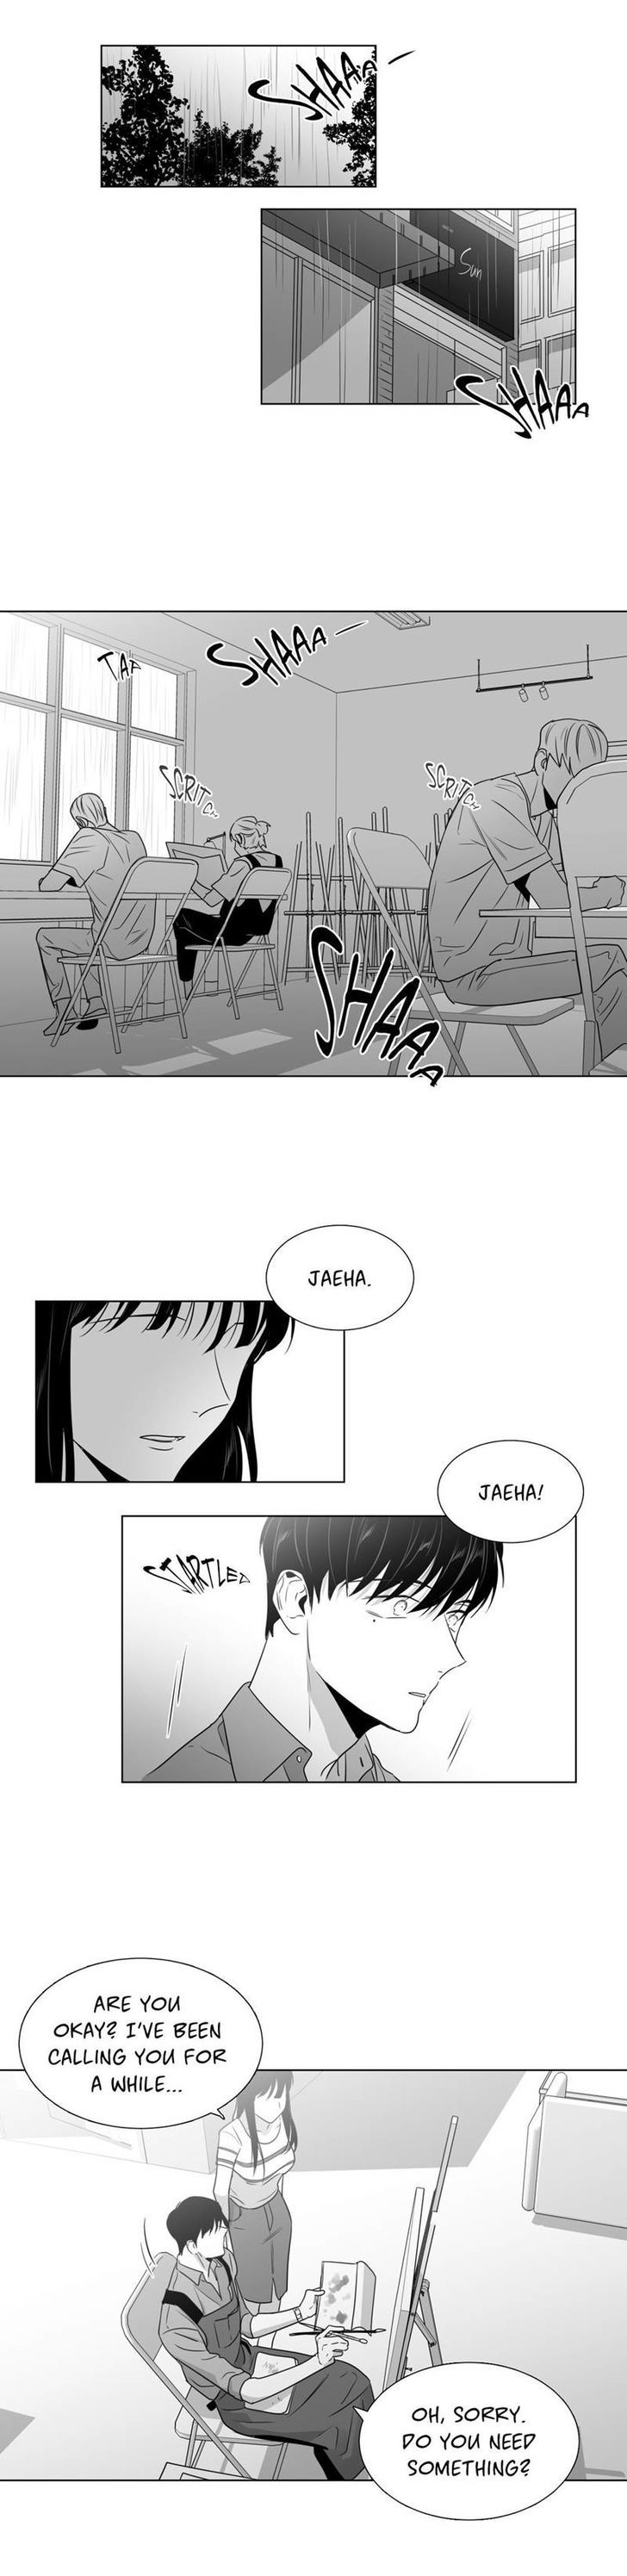 Lover Boy (Lezhin) Chapter 045 page 10